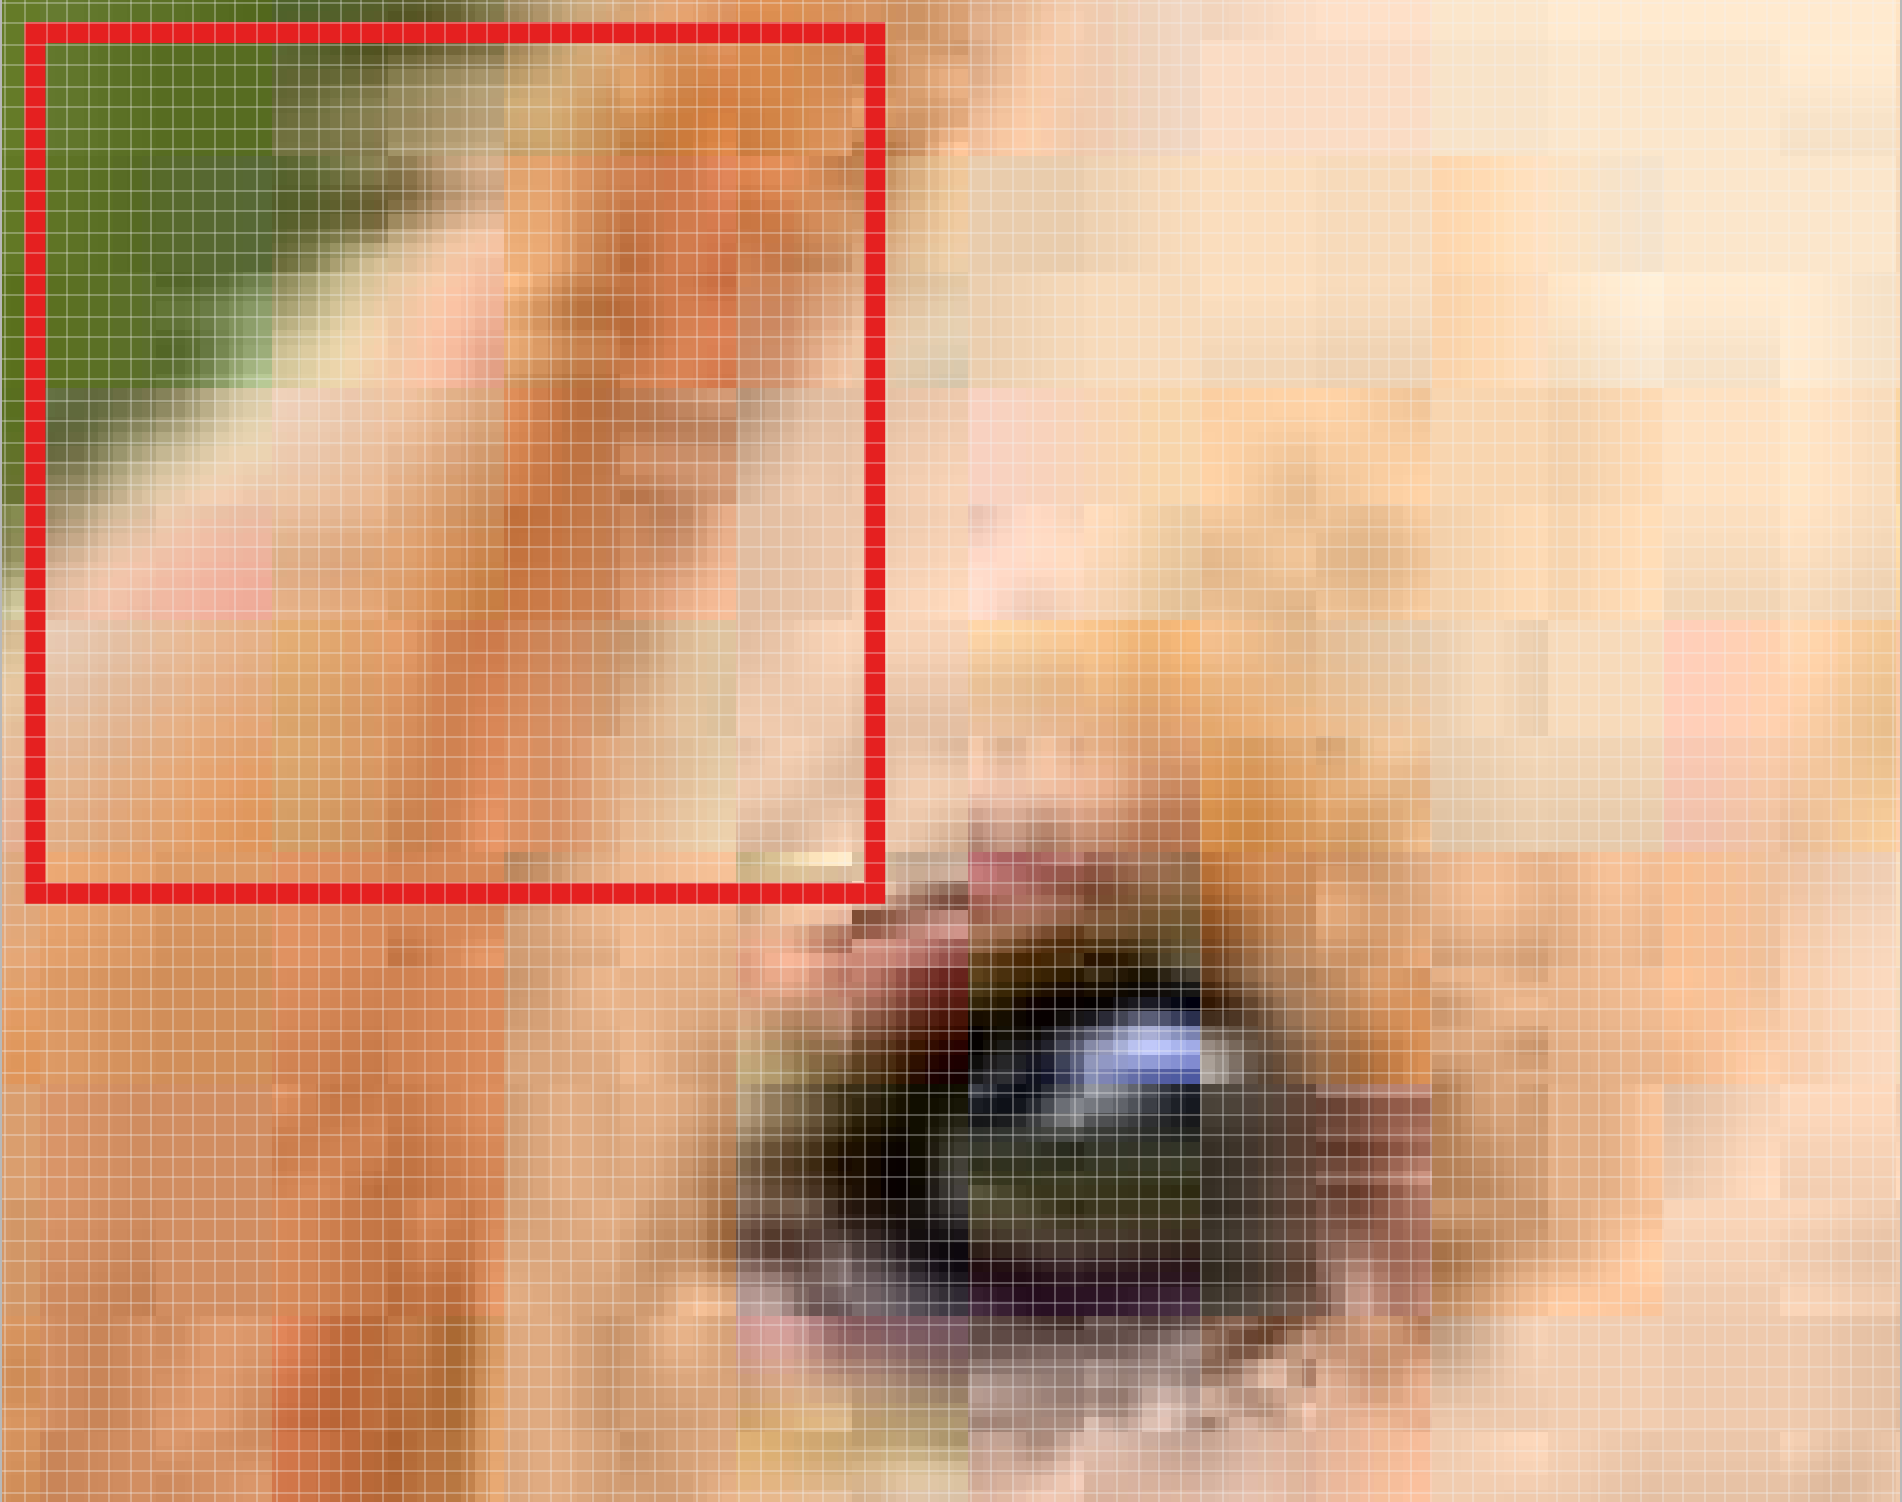 One patch of the Golden Retriever image.